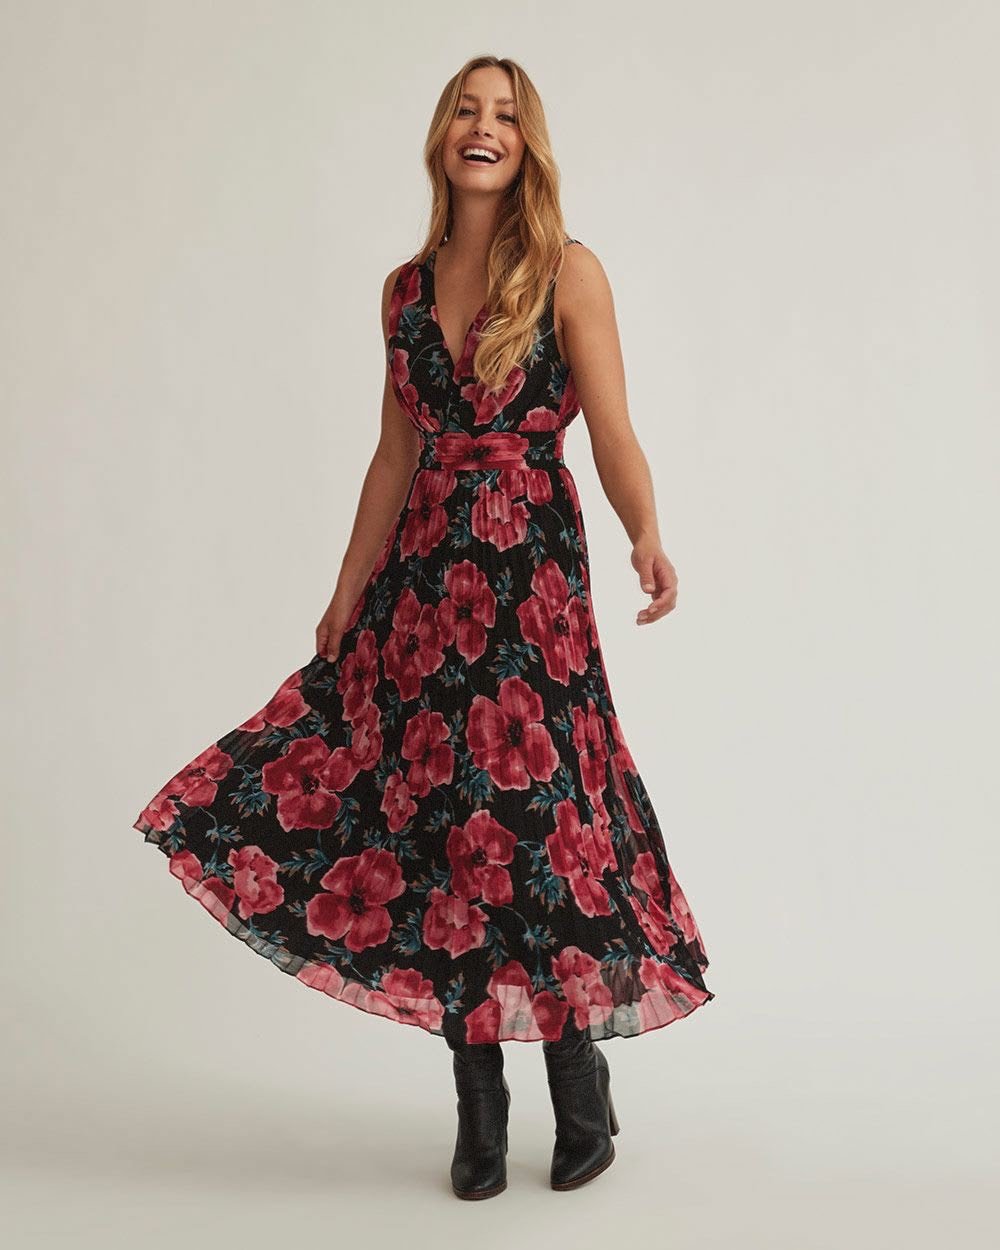 EXAMPLE OF APPROVED FLORAL COCKTAIL GOWN